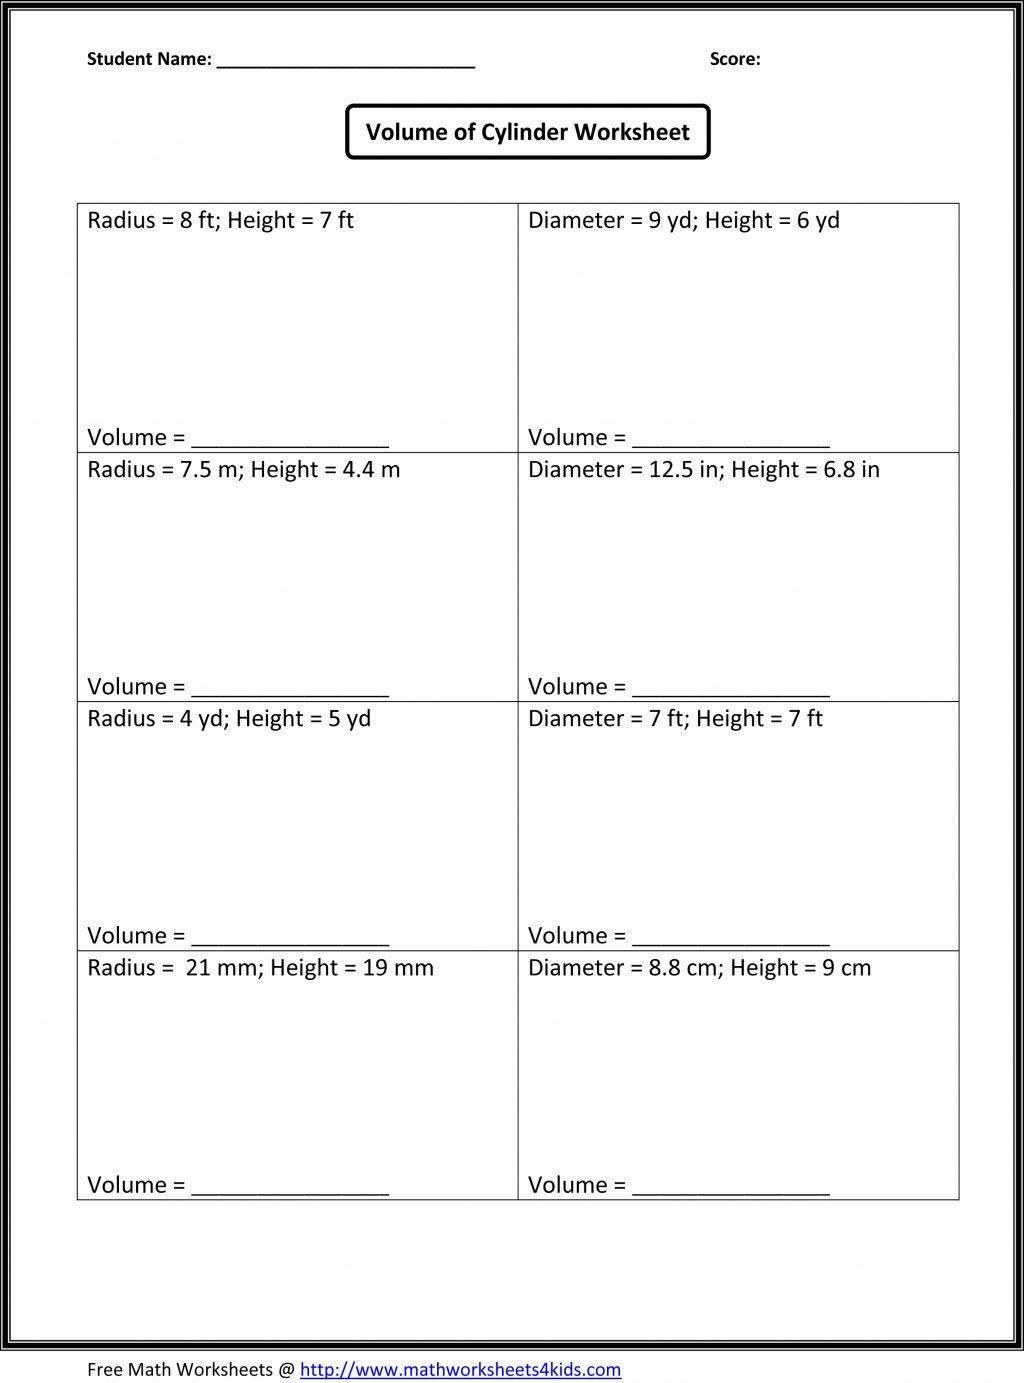 Common Core Math Worksheets 6th Grade Answers